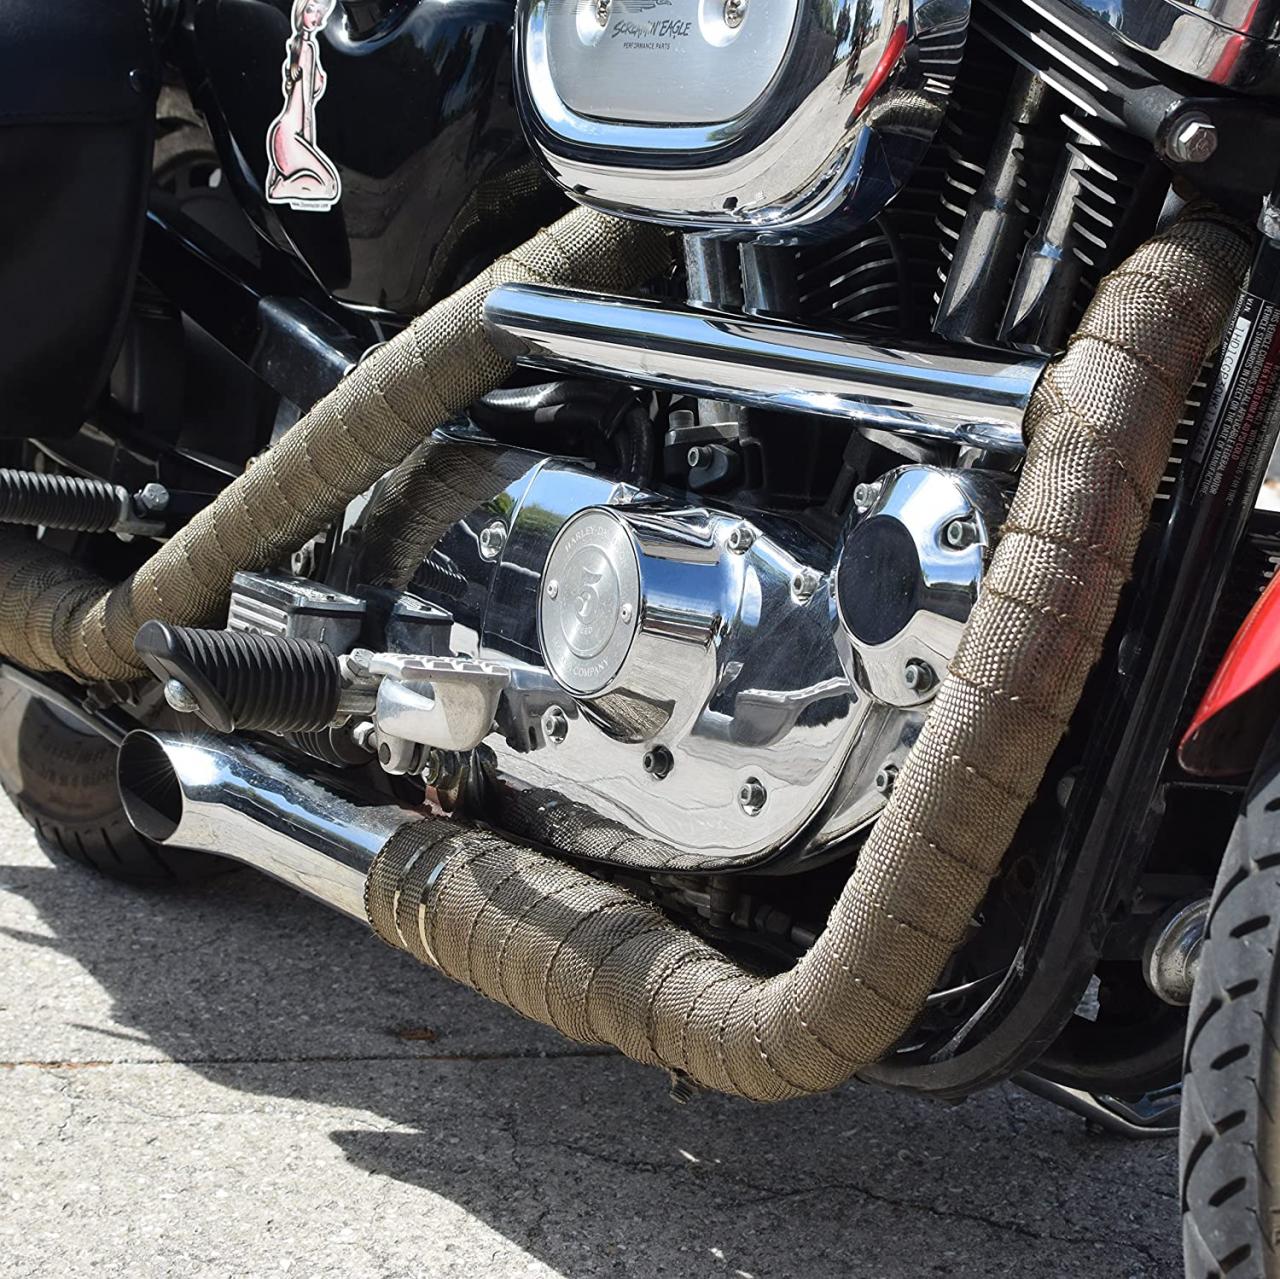 Best Motorcycle Exhaust Wraps (Review) in 2021 | Car Bibles